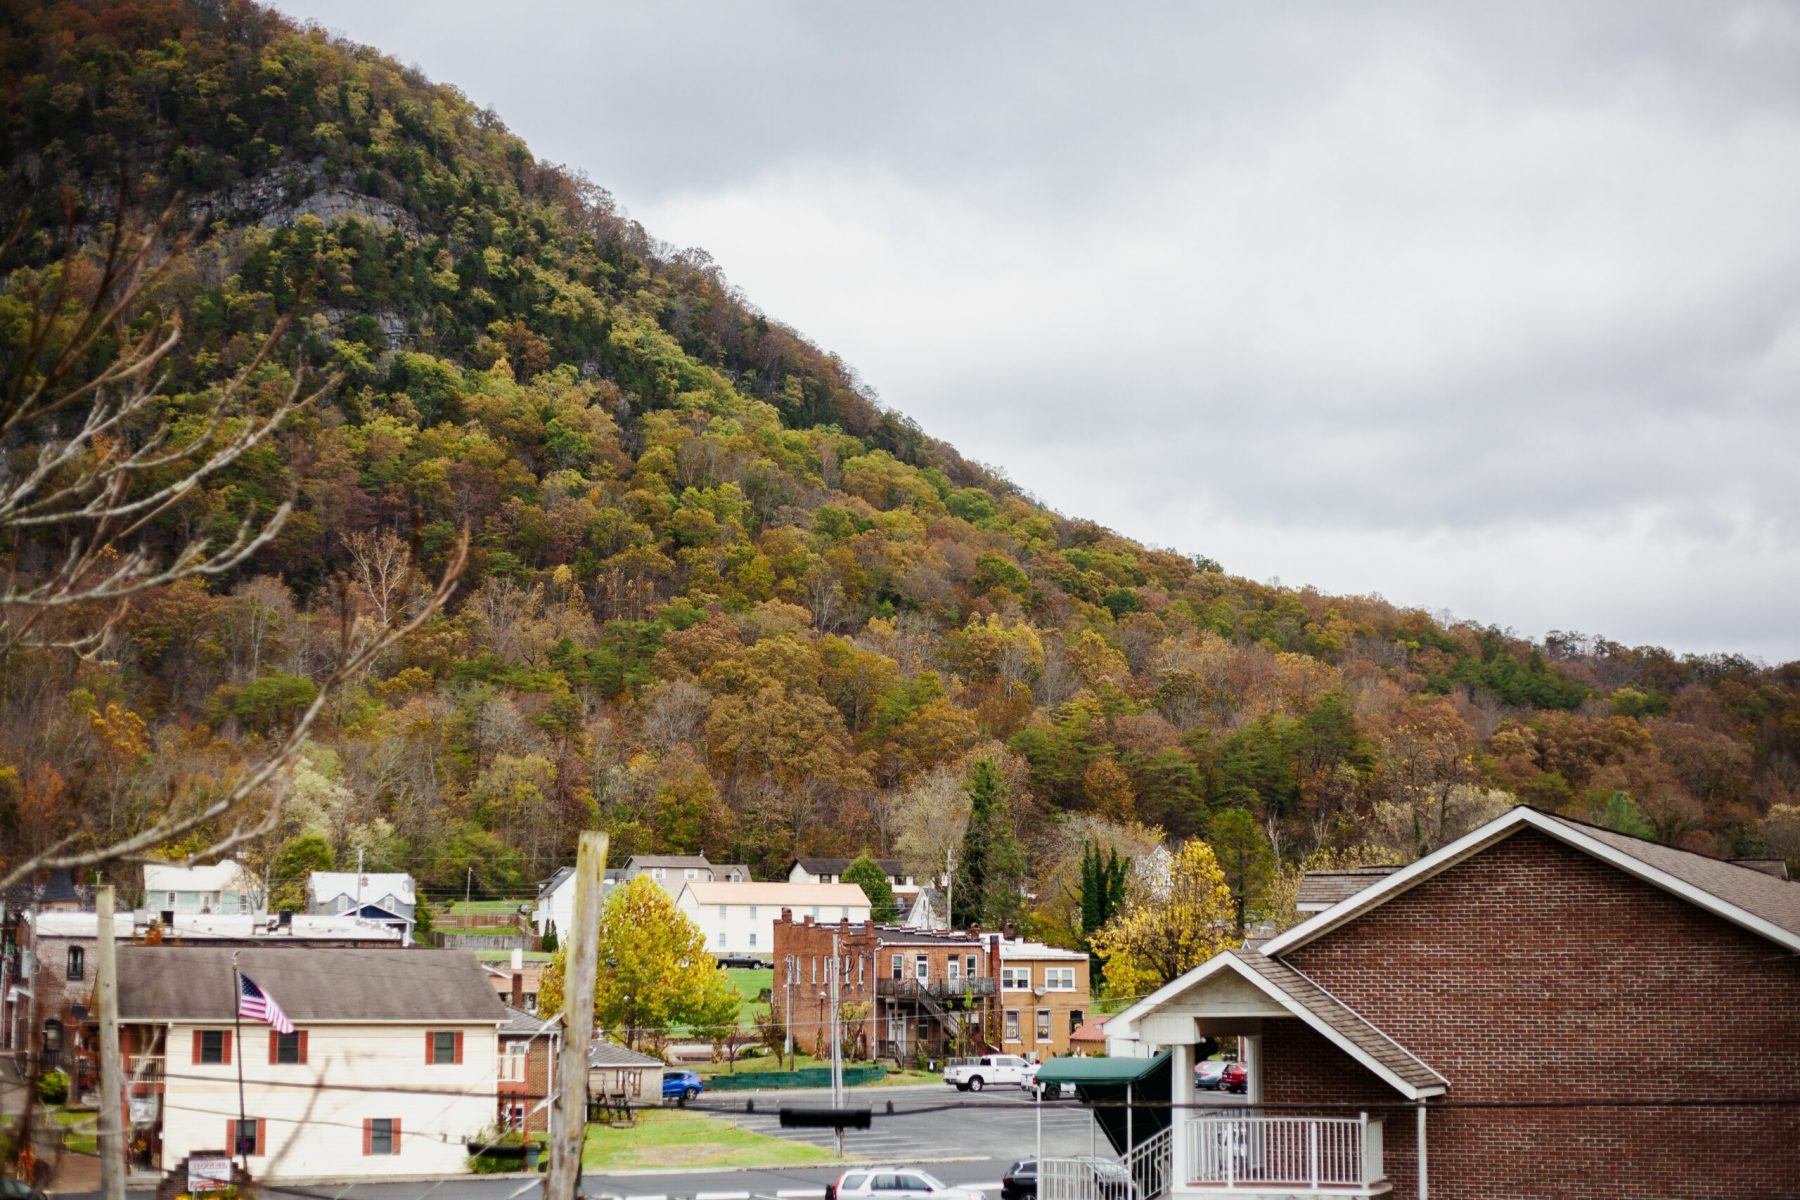 An Appalachian town with a variety of houses and buildings. There is a fall mountain scape in the distance.